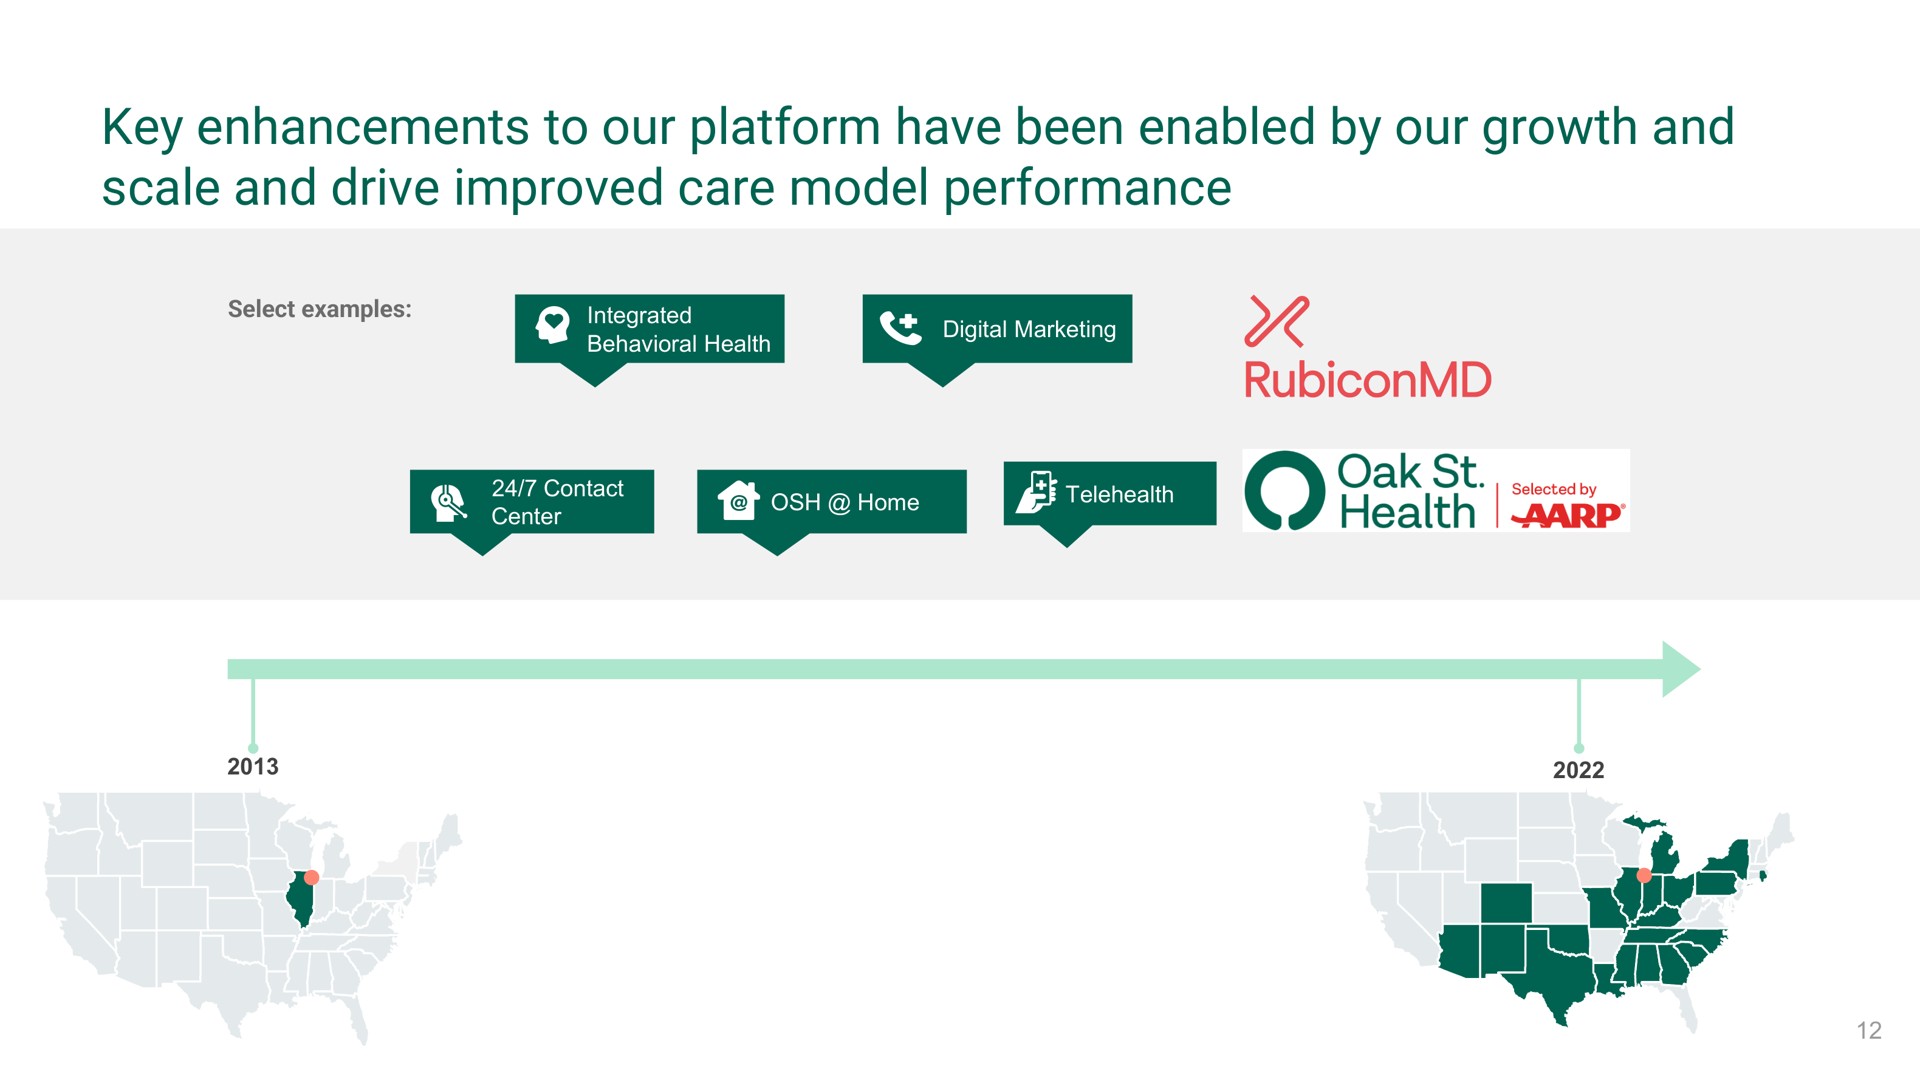 key enhancements to our platform have been enabled by our growth and scale and drive improved care model performance heath oak a i | Oak Street Health